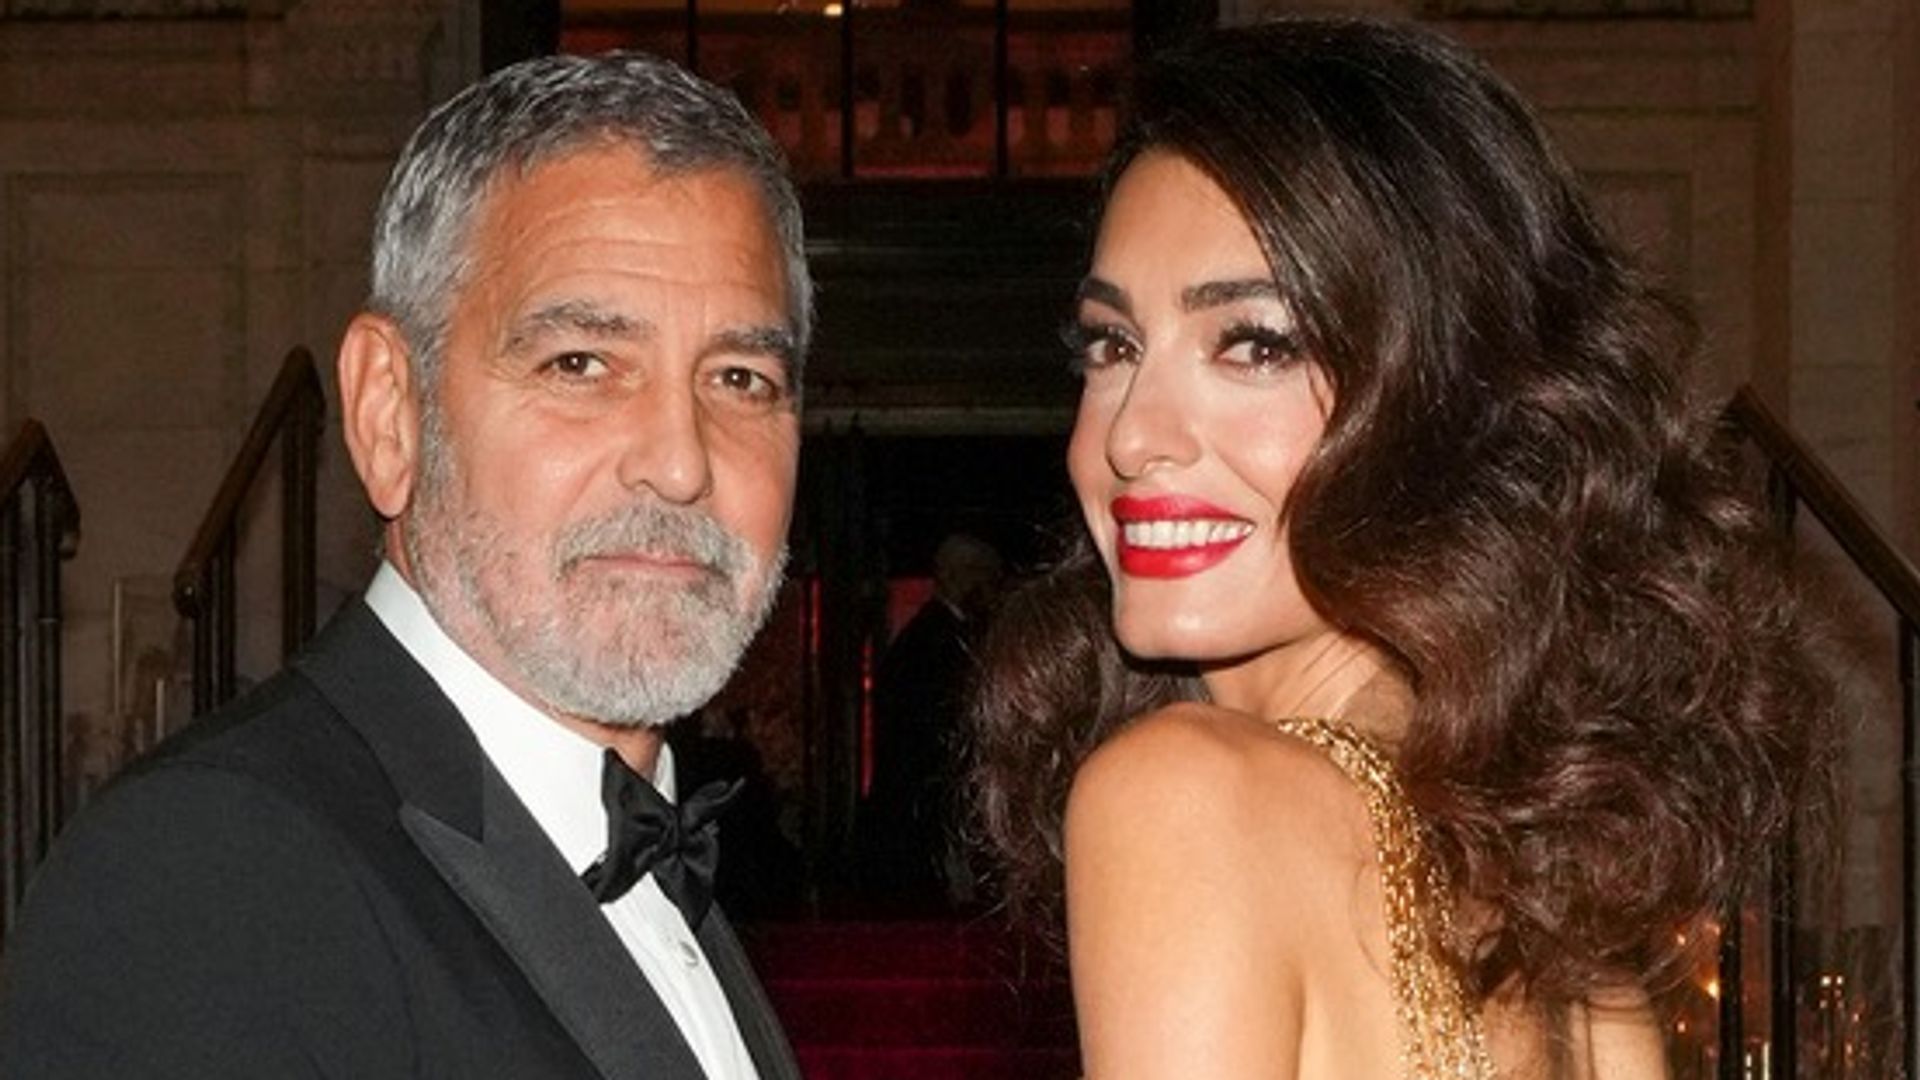 Amal Clooney in a gold dress and George Clooney in a suit as they walk up stairs with a red carpet